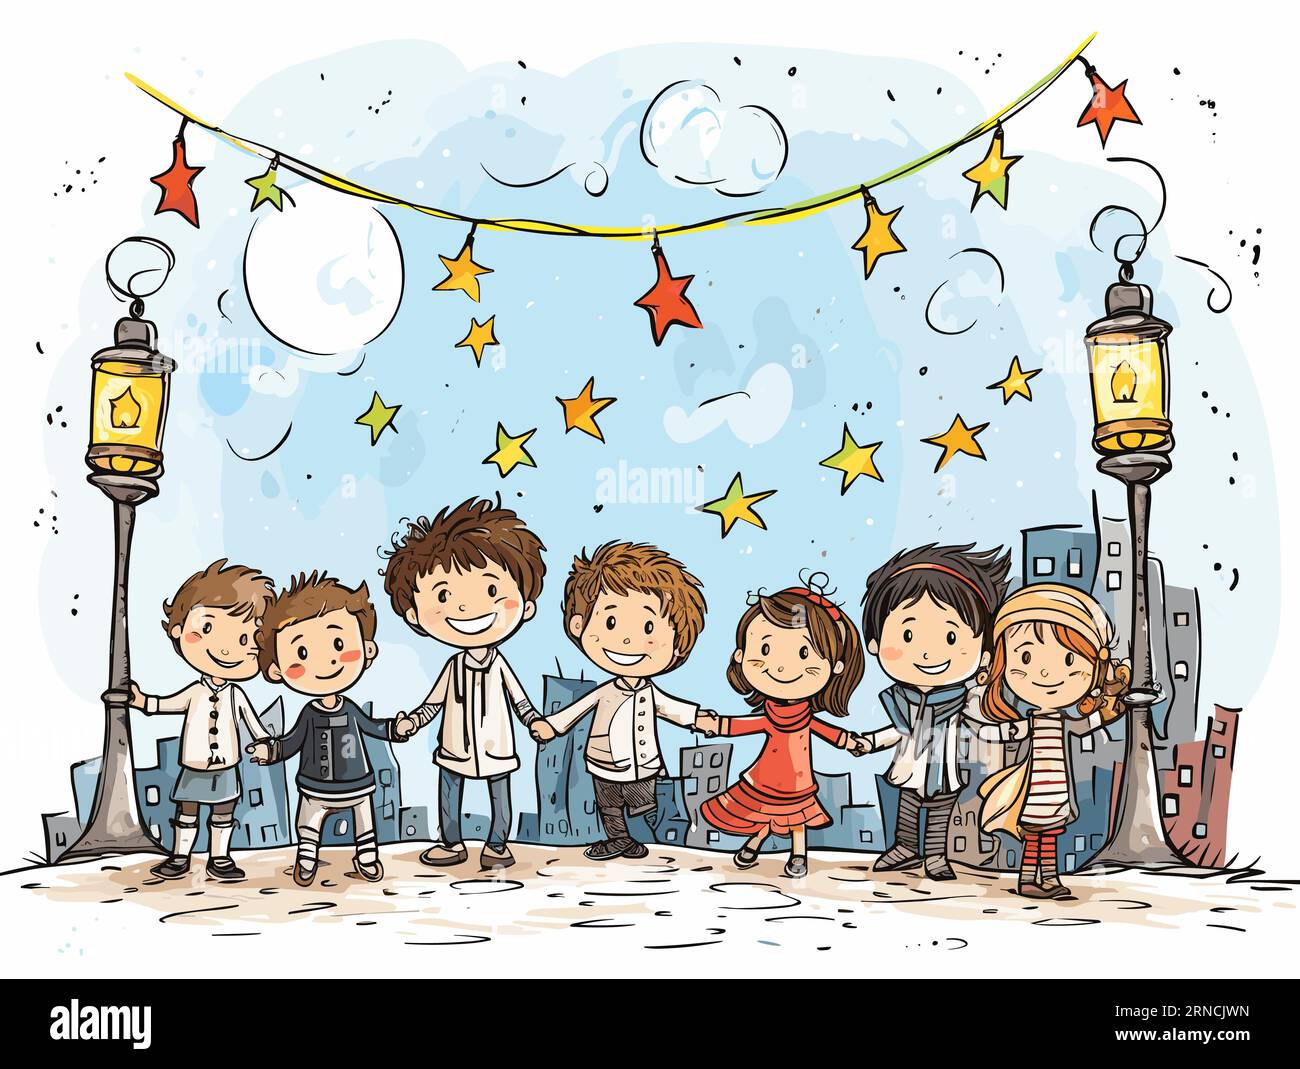 Cartoon Children In A City Dancing, Singing And Holding Ornaments, In The Style Of Atmospheric Skies, Verdadism, Neue Sachlichkeit, Childs Drawing Stock Vector